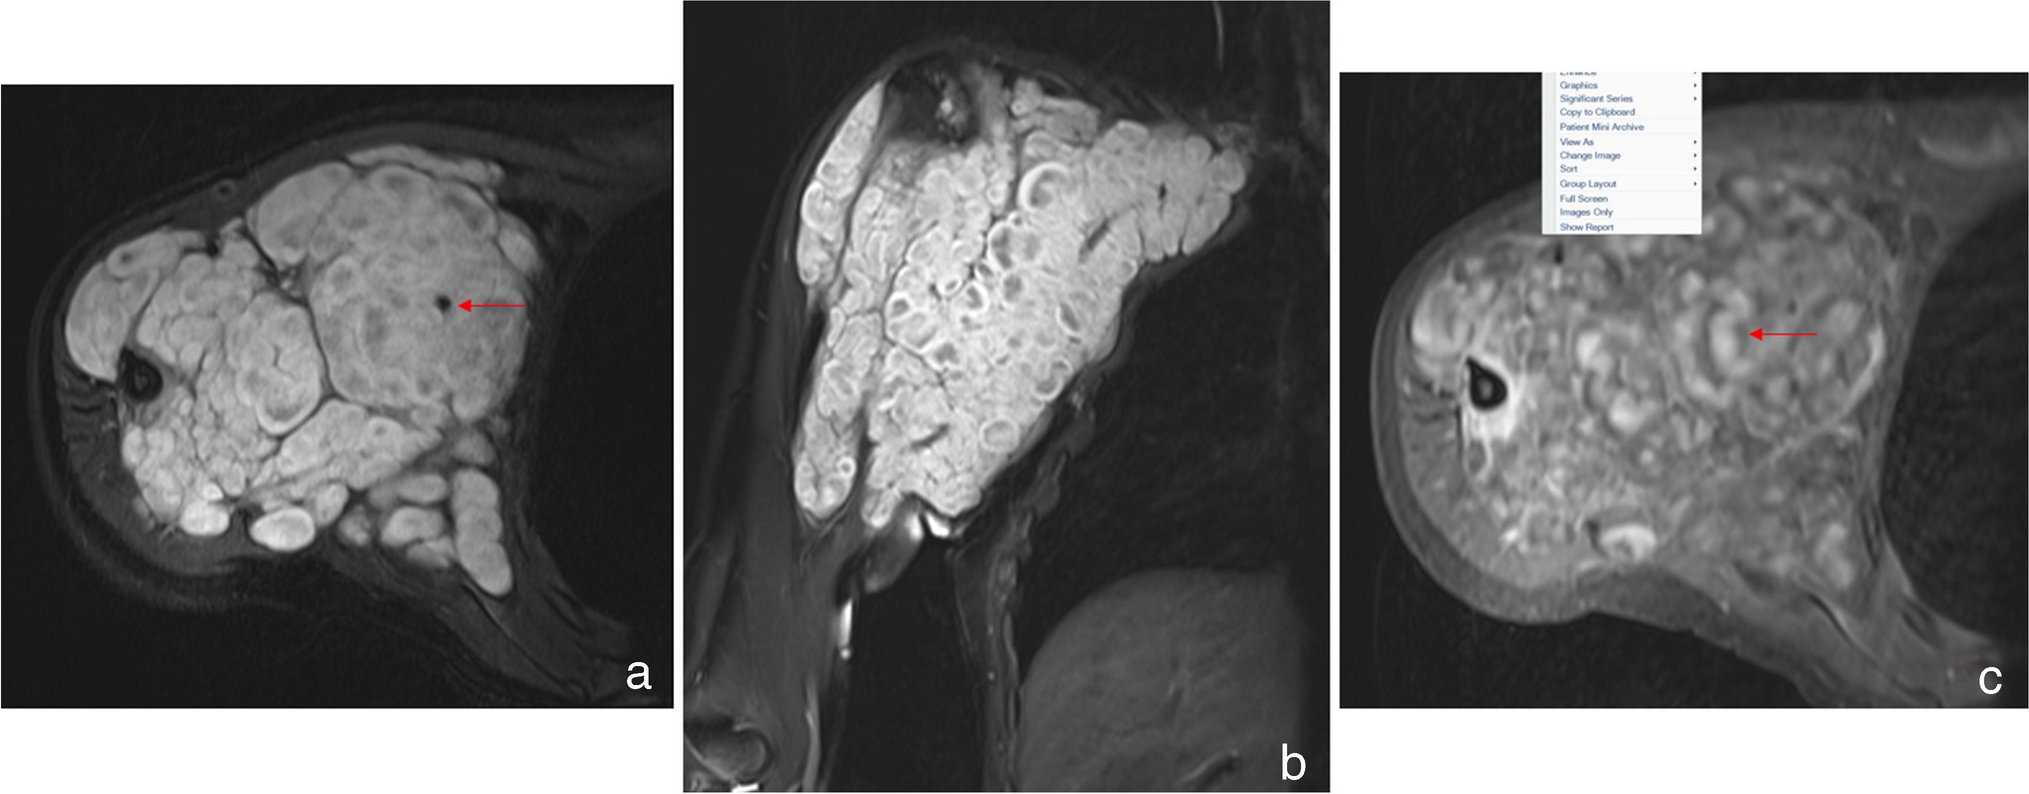 A Rare Presentation of Recurrent Malignant Peripheral Nerve Sheath Tumor with Glandular Differentiation—A Case Report